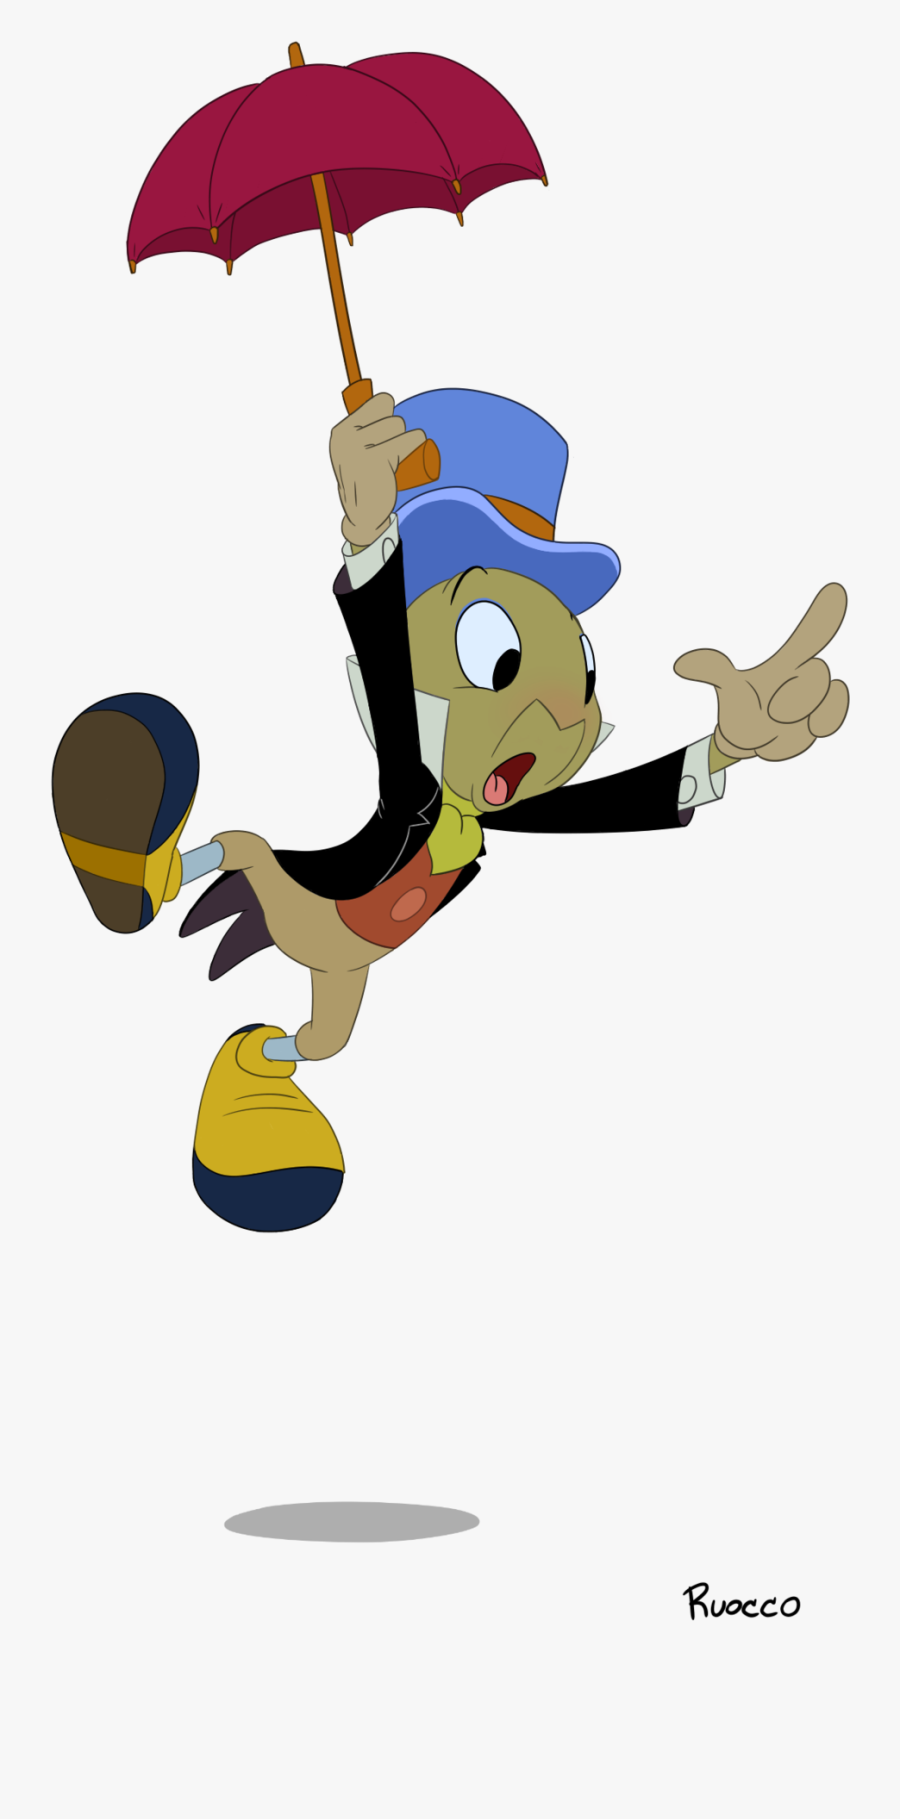 Download Jiminy Cricket Png Clipart For Designing Projects - Jiminy Cricket Png, Transparent Clipart